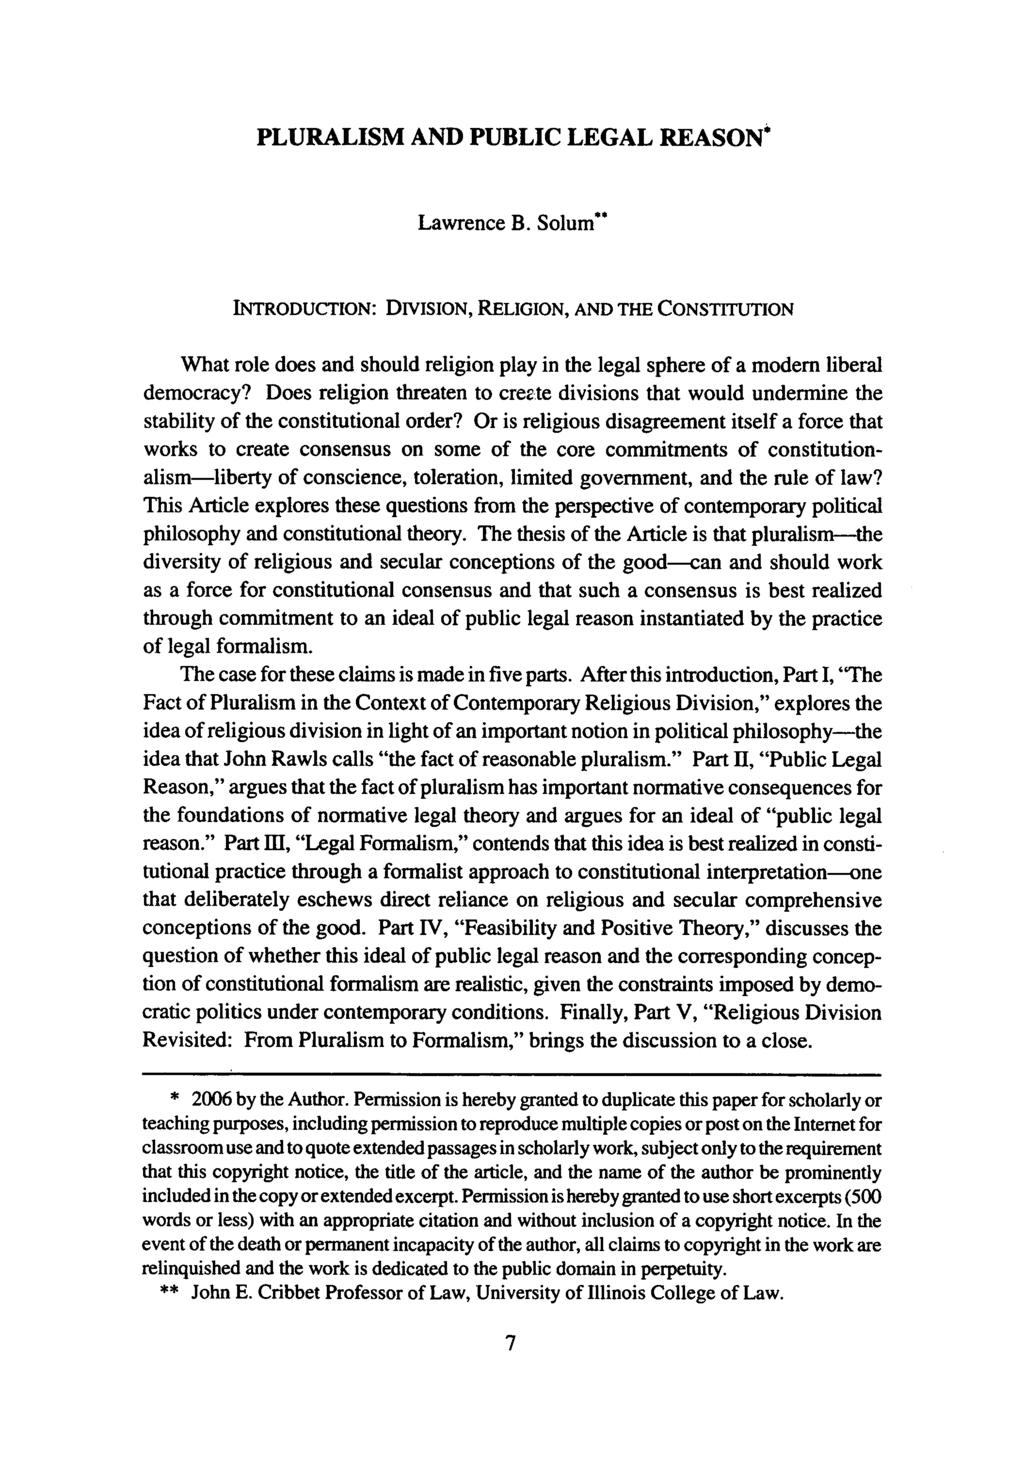 PLURALISM AND PUBLIC LEGAL REASON Lawrence B. Solum** INTRODUCTION: DIVISION, RELIGION, AND THE CONSTITUTION What role does and should religion play in the legal sphere of a modem liberal democracy?